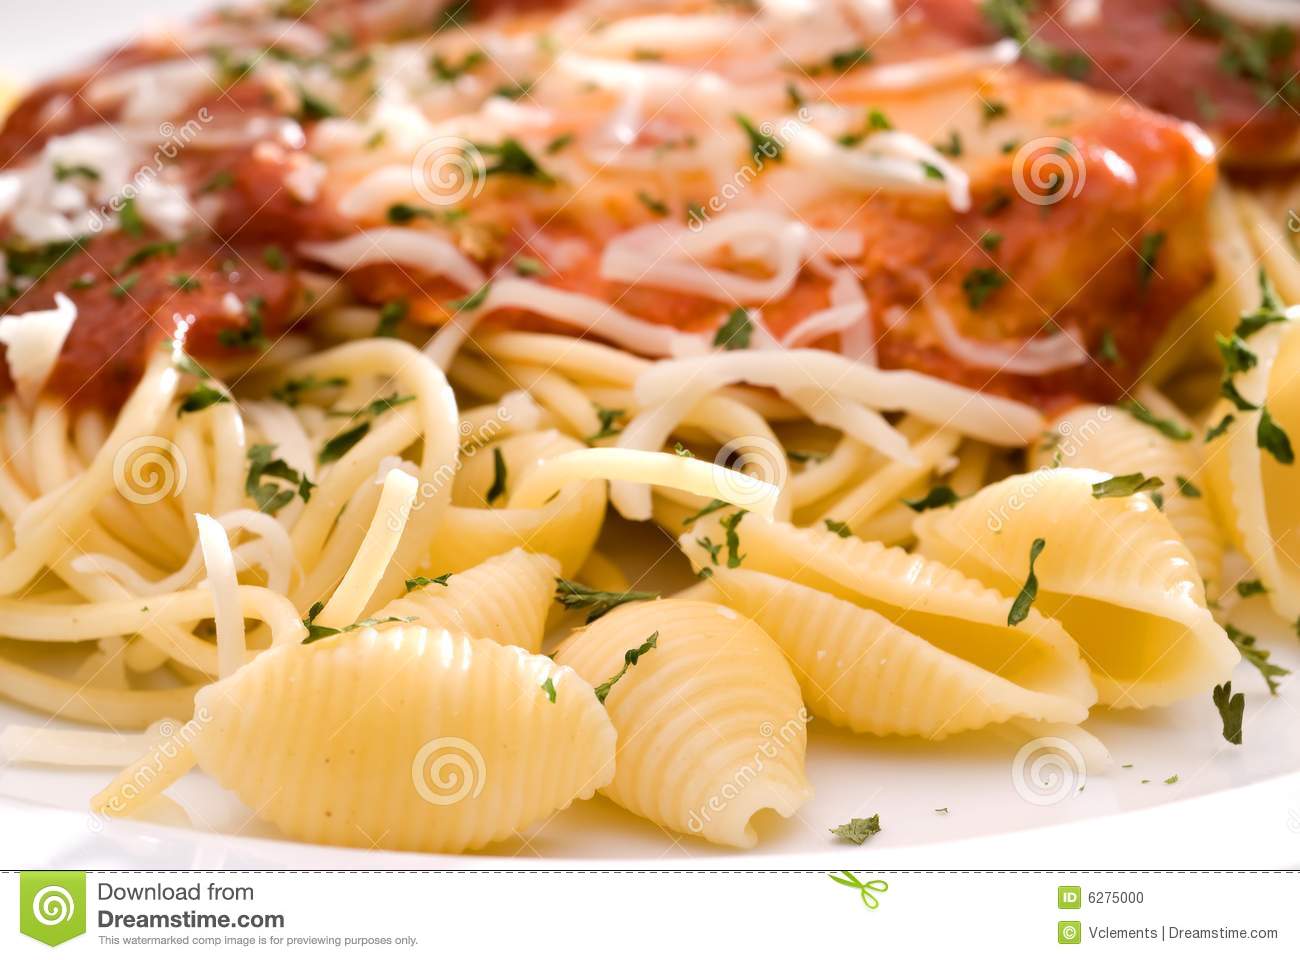 Chicken Parmesan And Noodles Stock Photo   Image  6275000